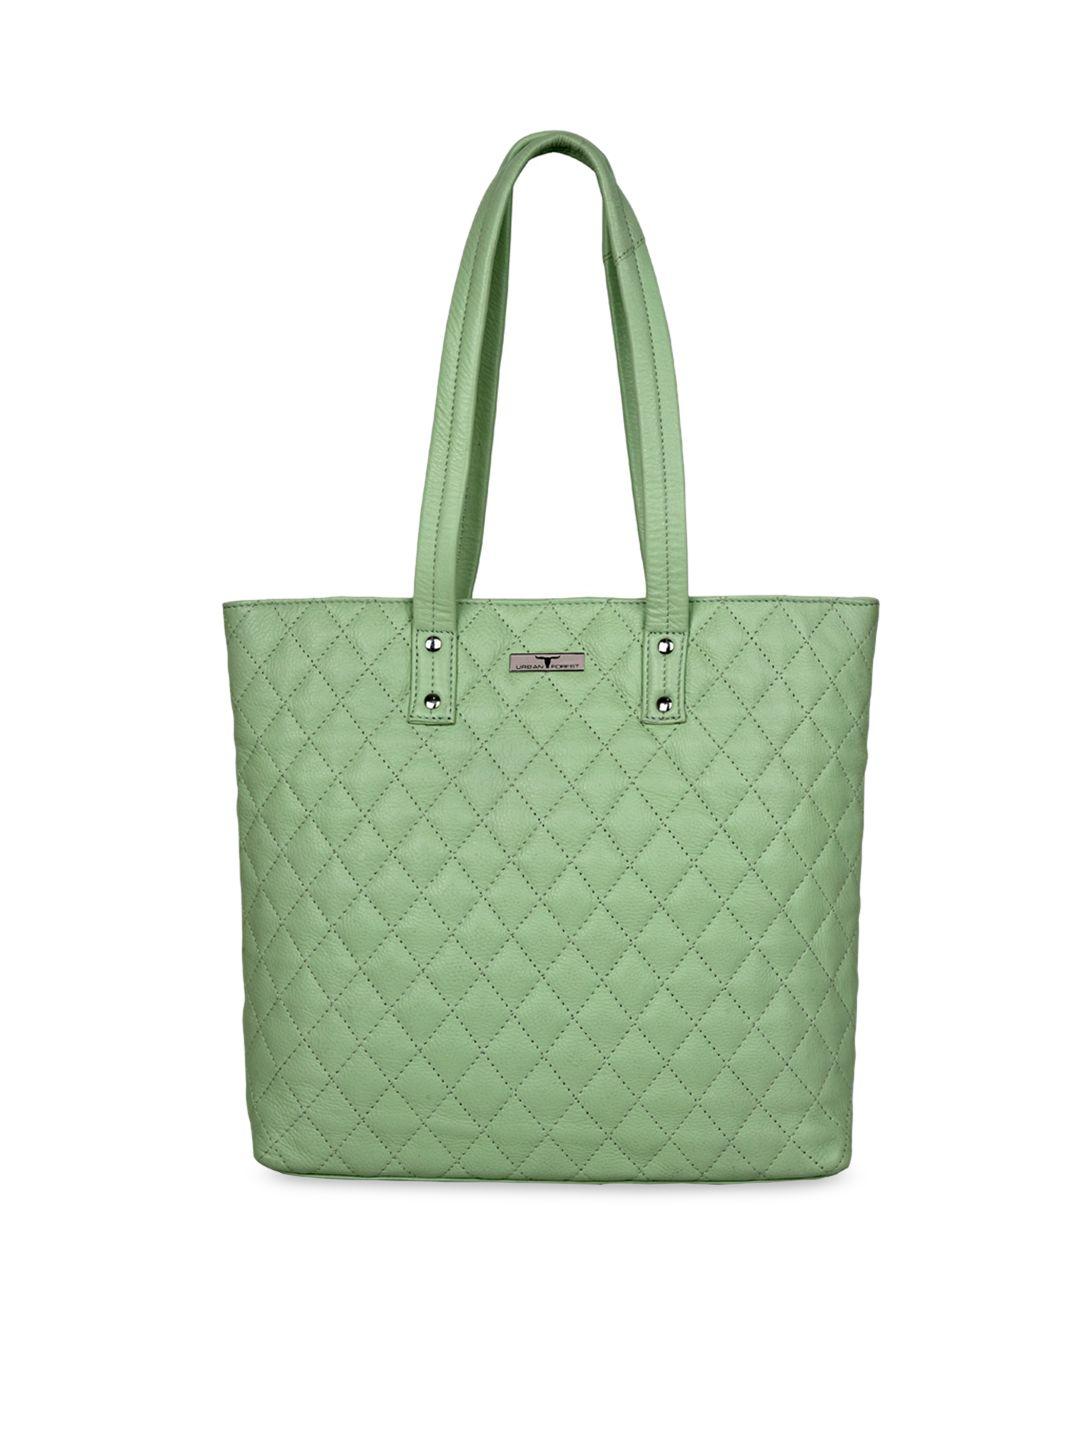 urban forest textured leather shopper shoulder bag with quilted